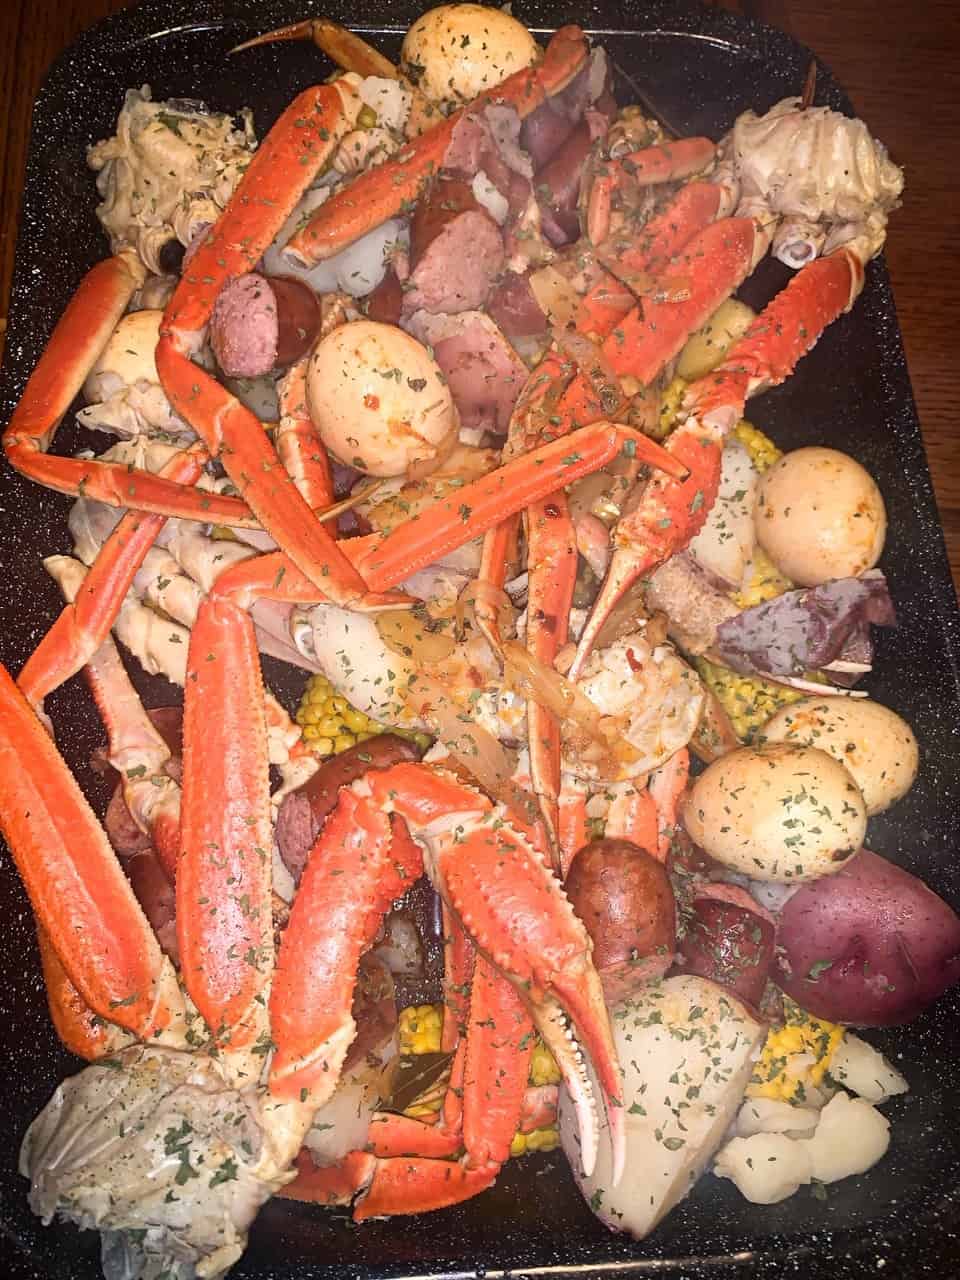 Garlic Butter Seafood Boil Razzle Dazzle Life We're bringing this southern summertime specialty to your home kitchen with shrimp, lobster tail, and spicy italian. garlic butter seafood boil